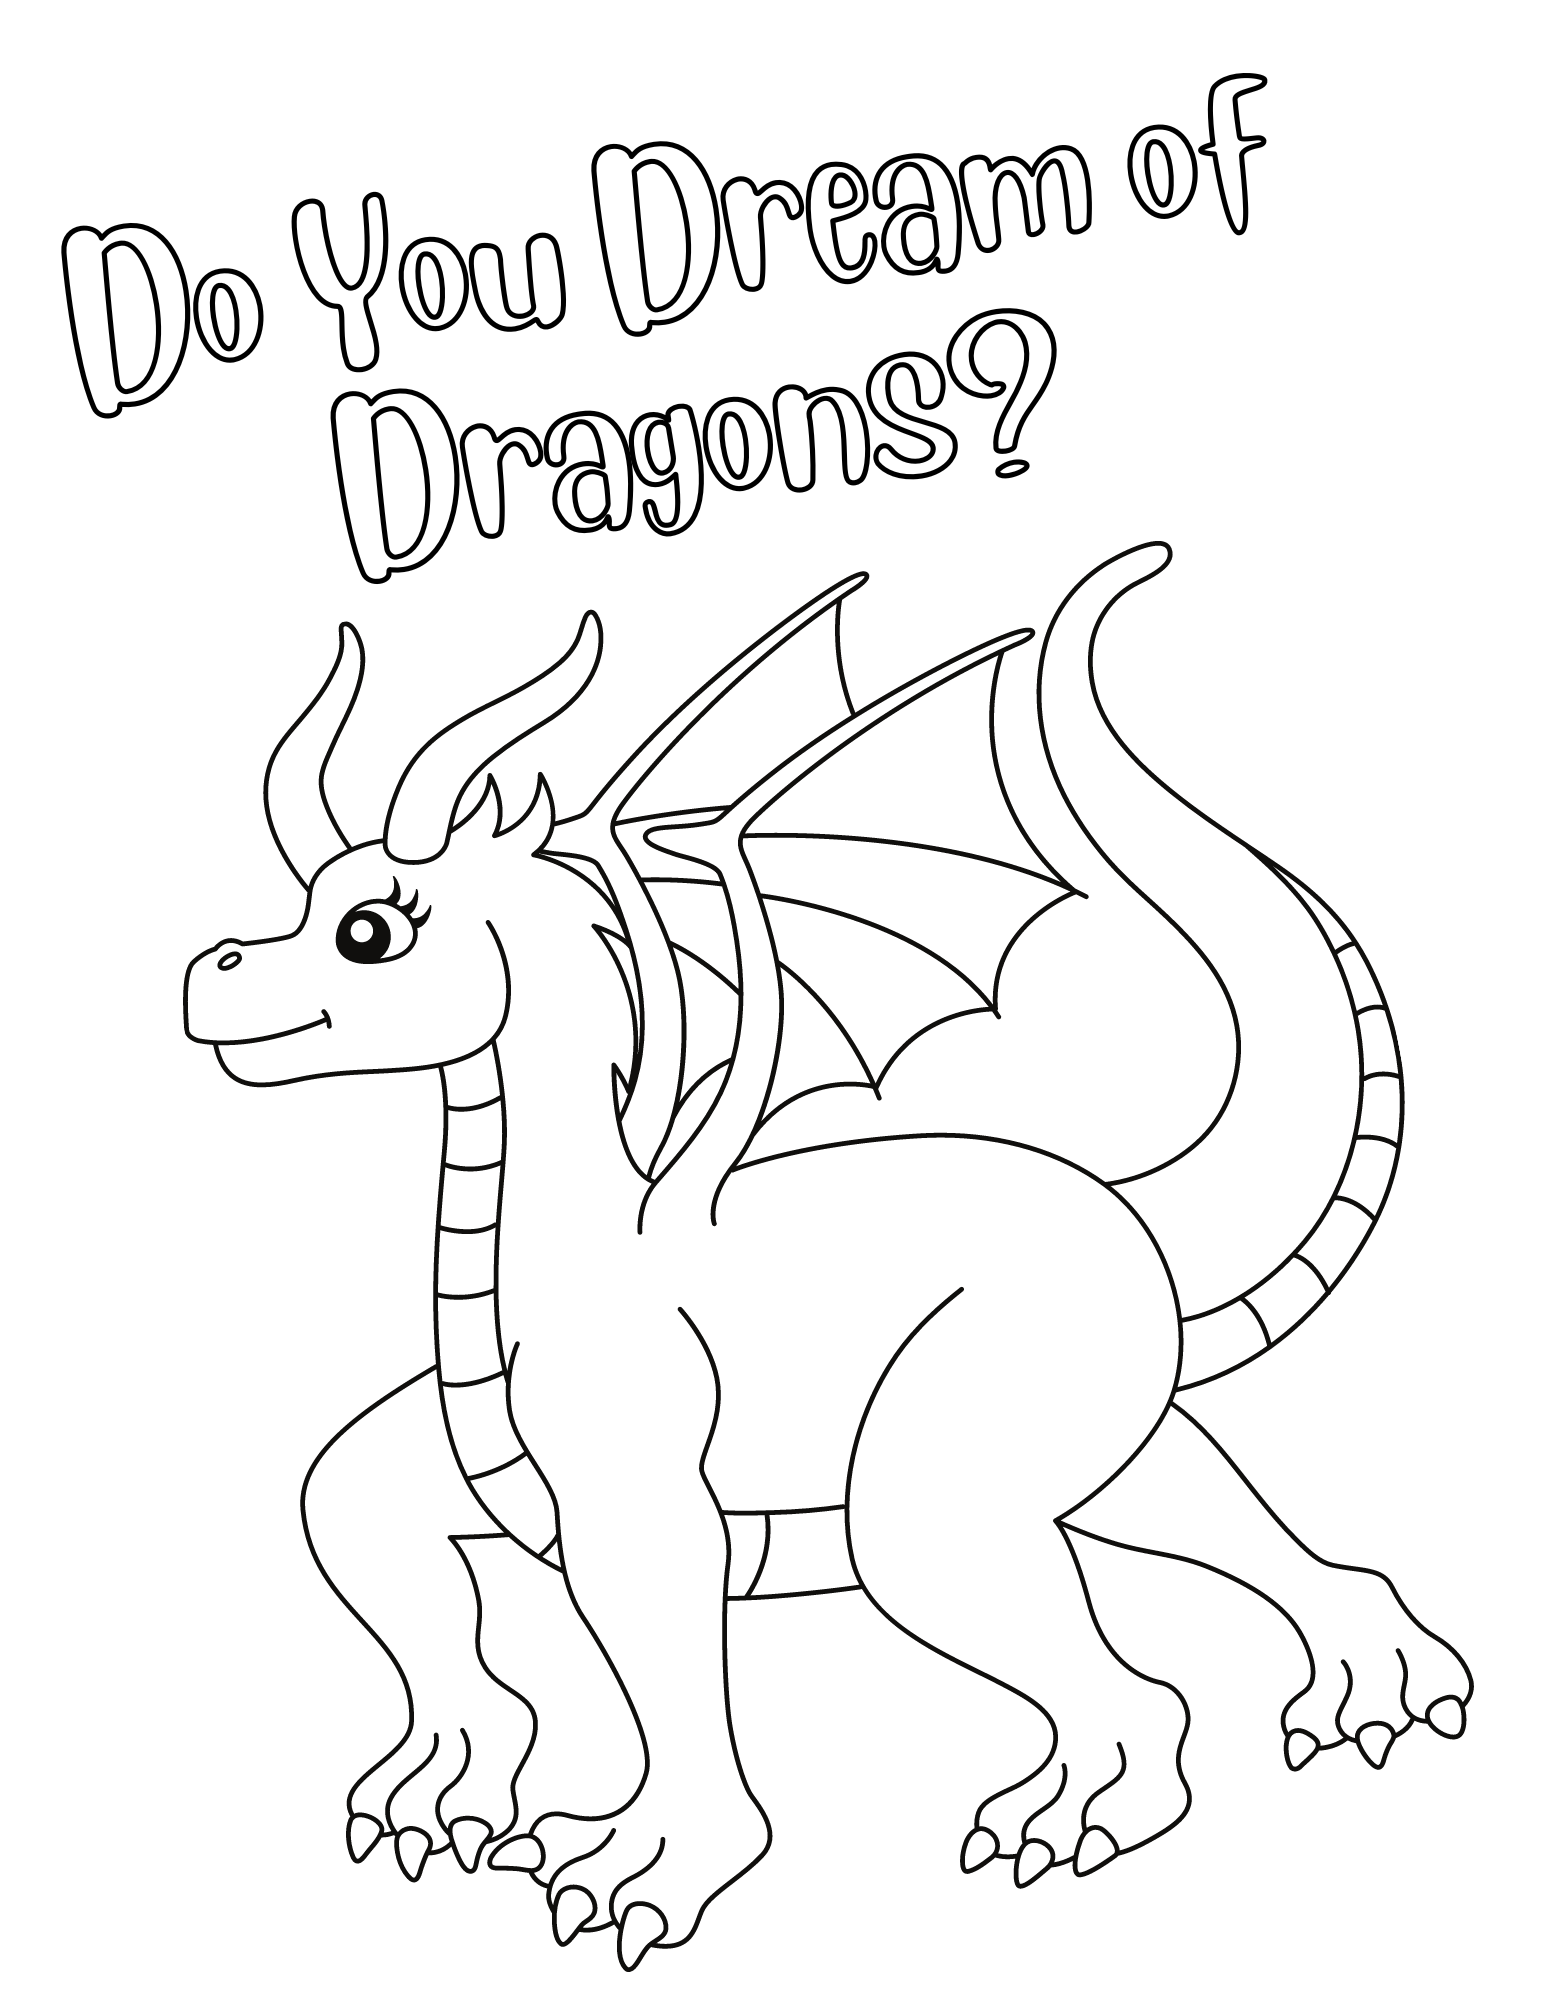 5 Cute Dragon Coloring Pages